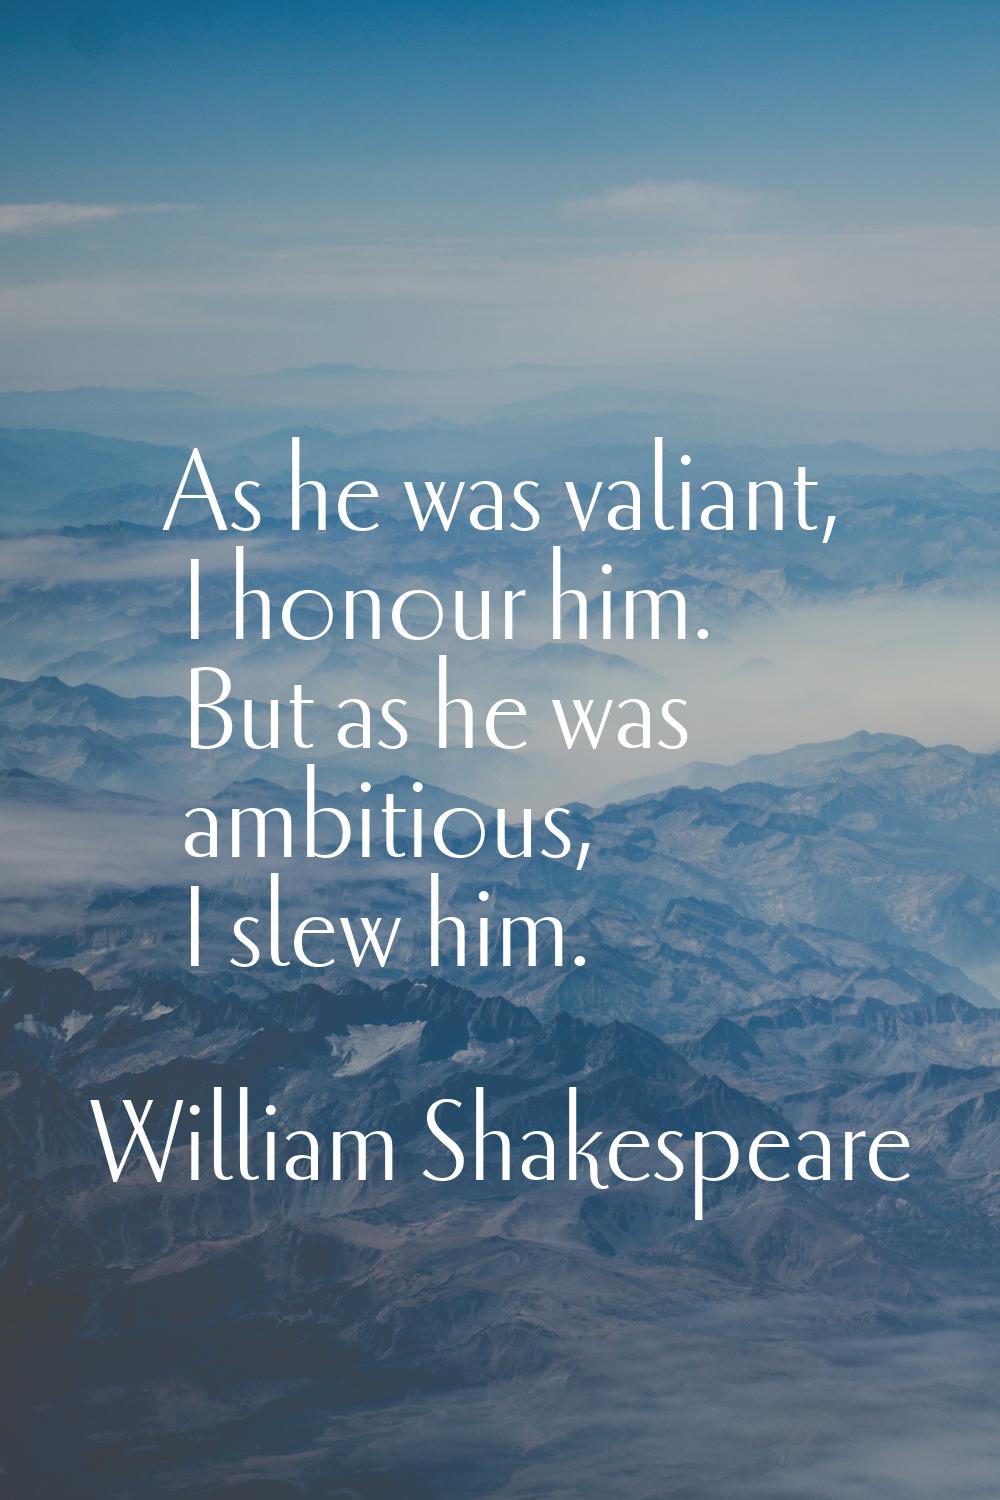 As he was valiant, I honour him. But as he was ambitious, I slew him.